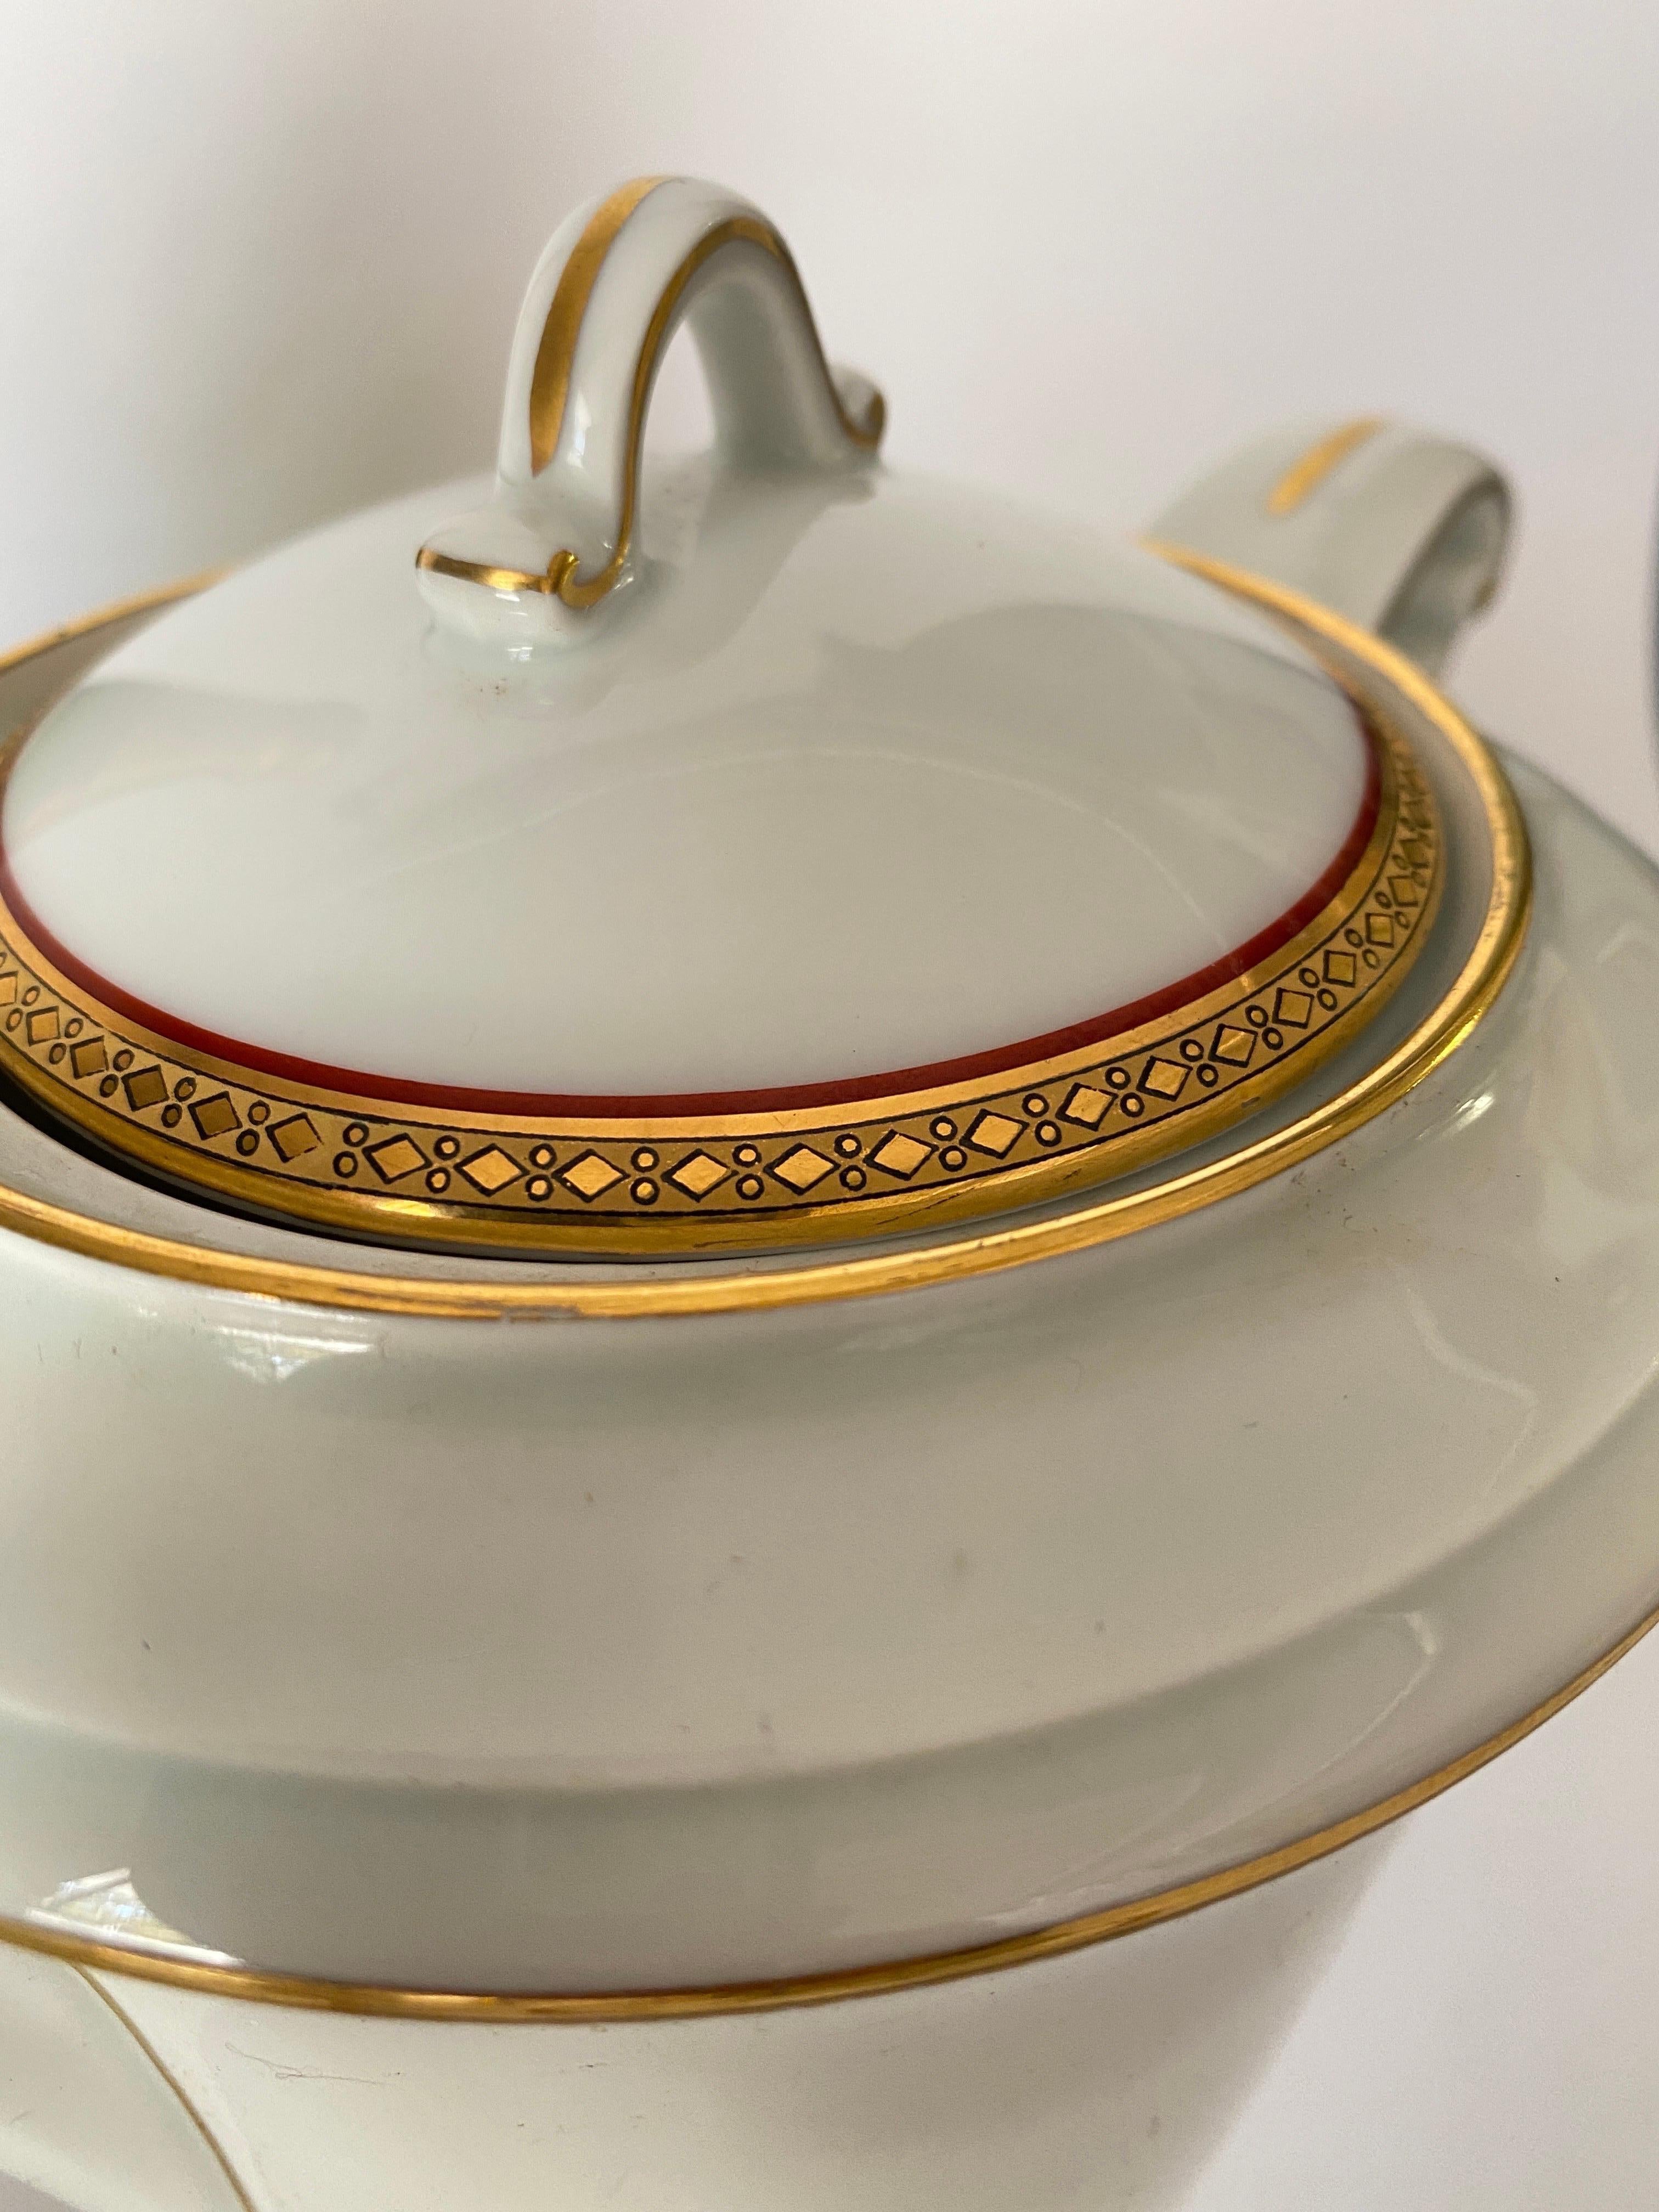 Mid-20th Century De Havilland, Limoges Coffee Service in Porcelain and 24-Karat Gold, 19 Pieces For Sale